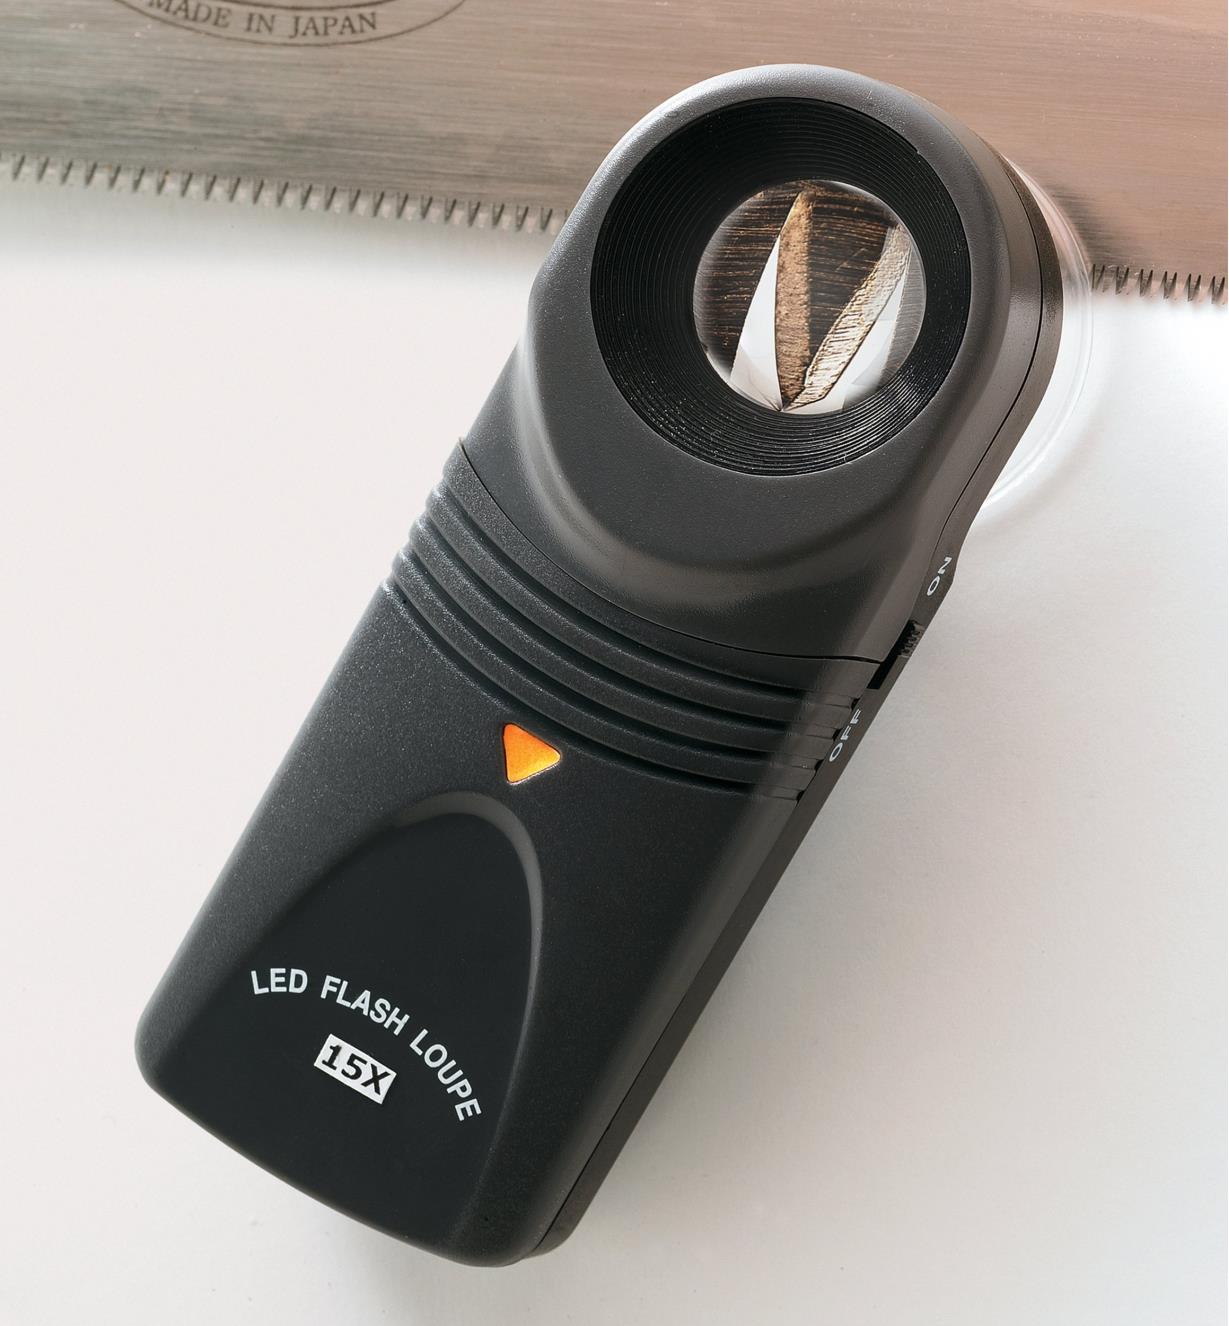 Using a 15-Power Lighted Loupe to examine saw teeth